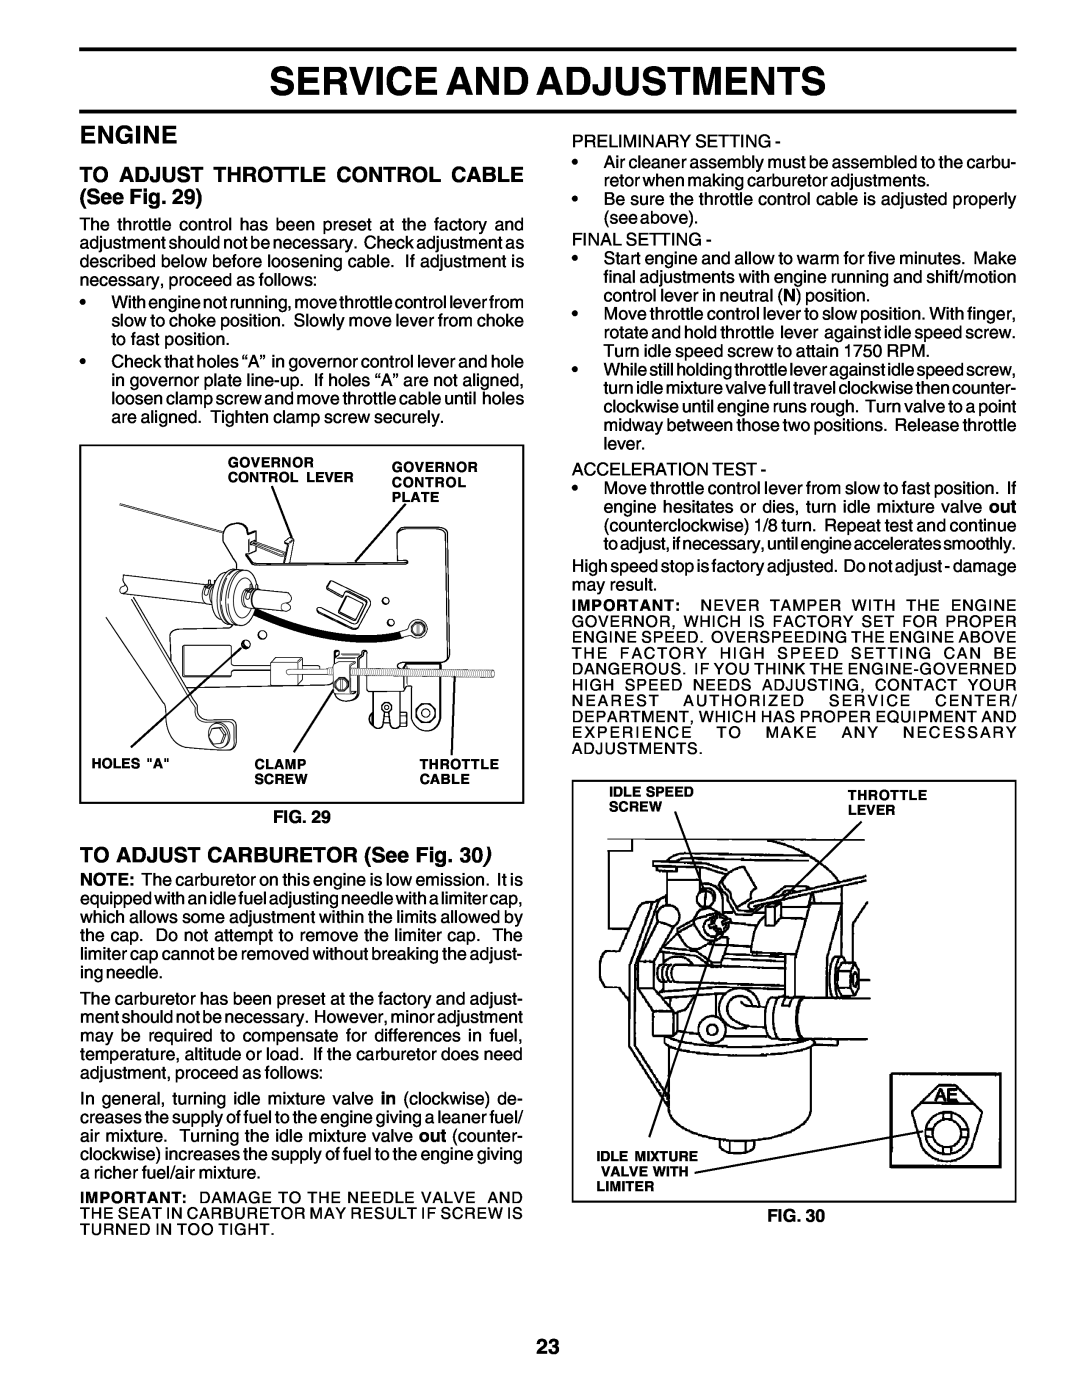 Poulan PO14542B TO ADJUST THROTTLE CONTROL CABLE See Fig, TO ADJUST CARBURETOR See Fig, Service And Adjustments, Engine 